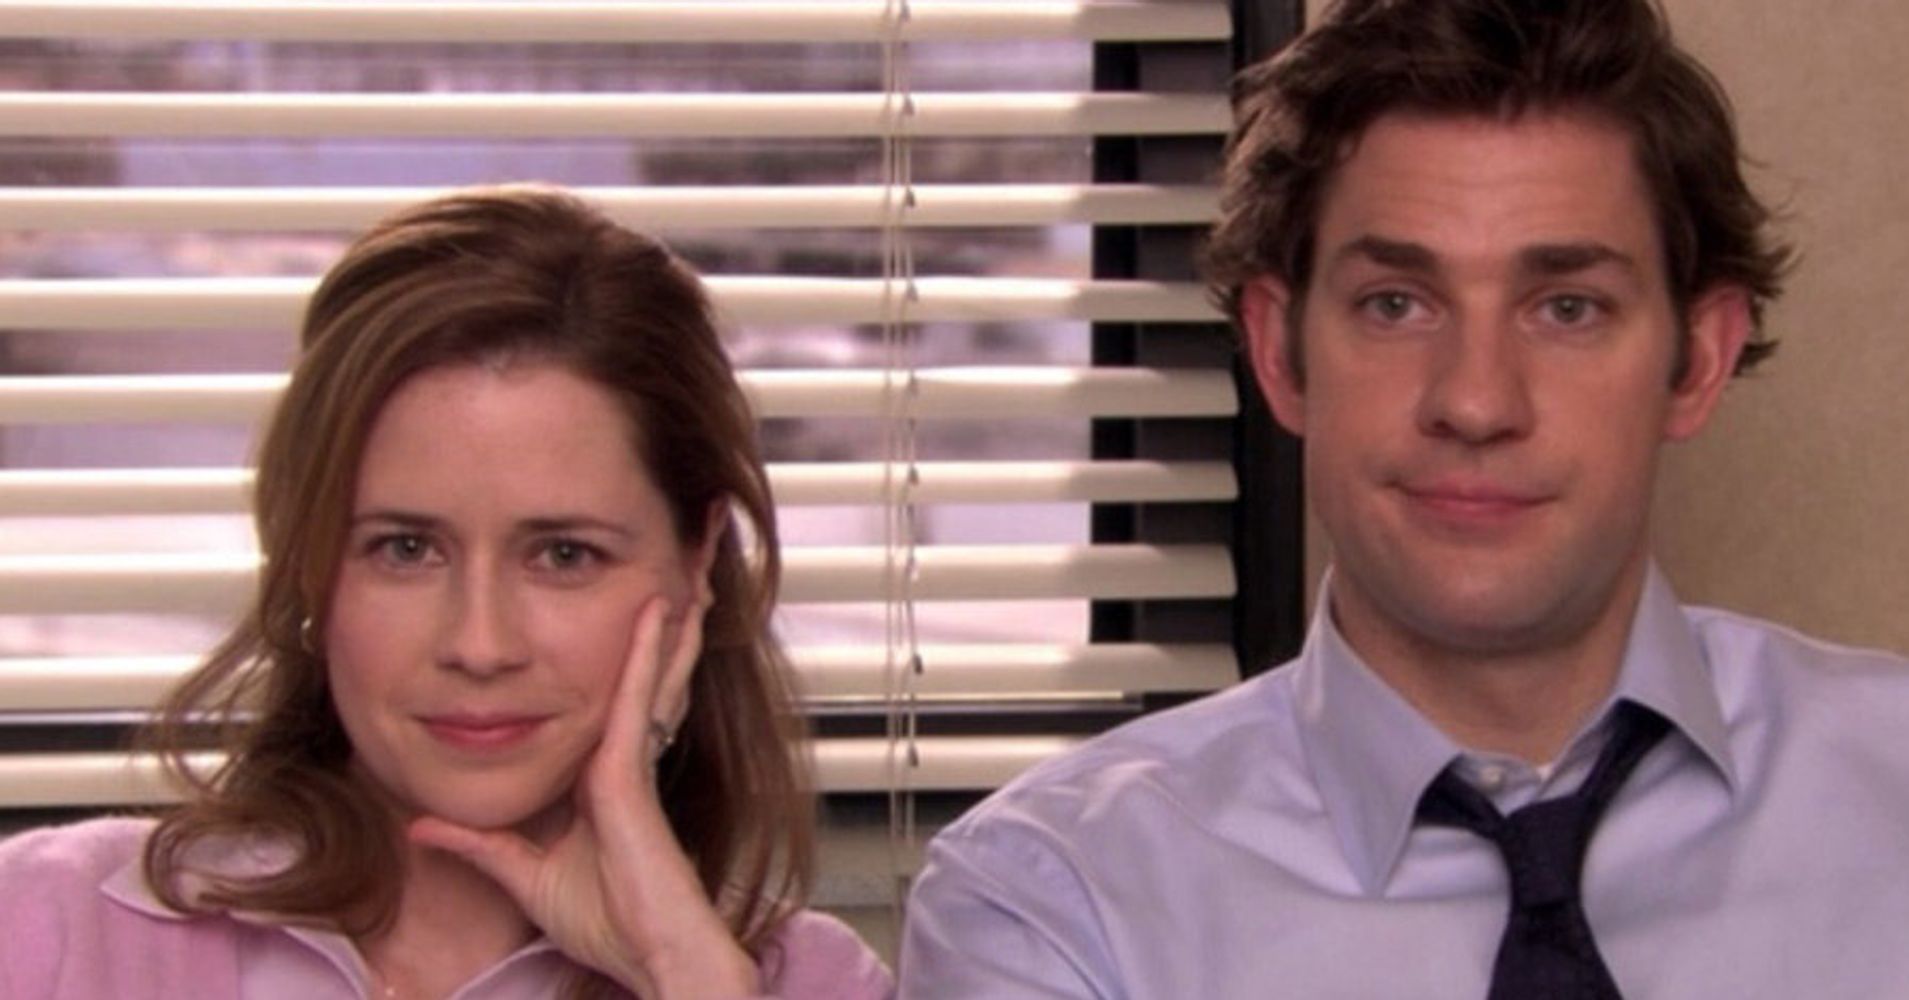 5 Netflix Shows To Watch If You Like ‘The Office’ HuffPost